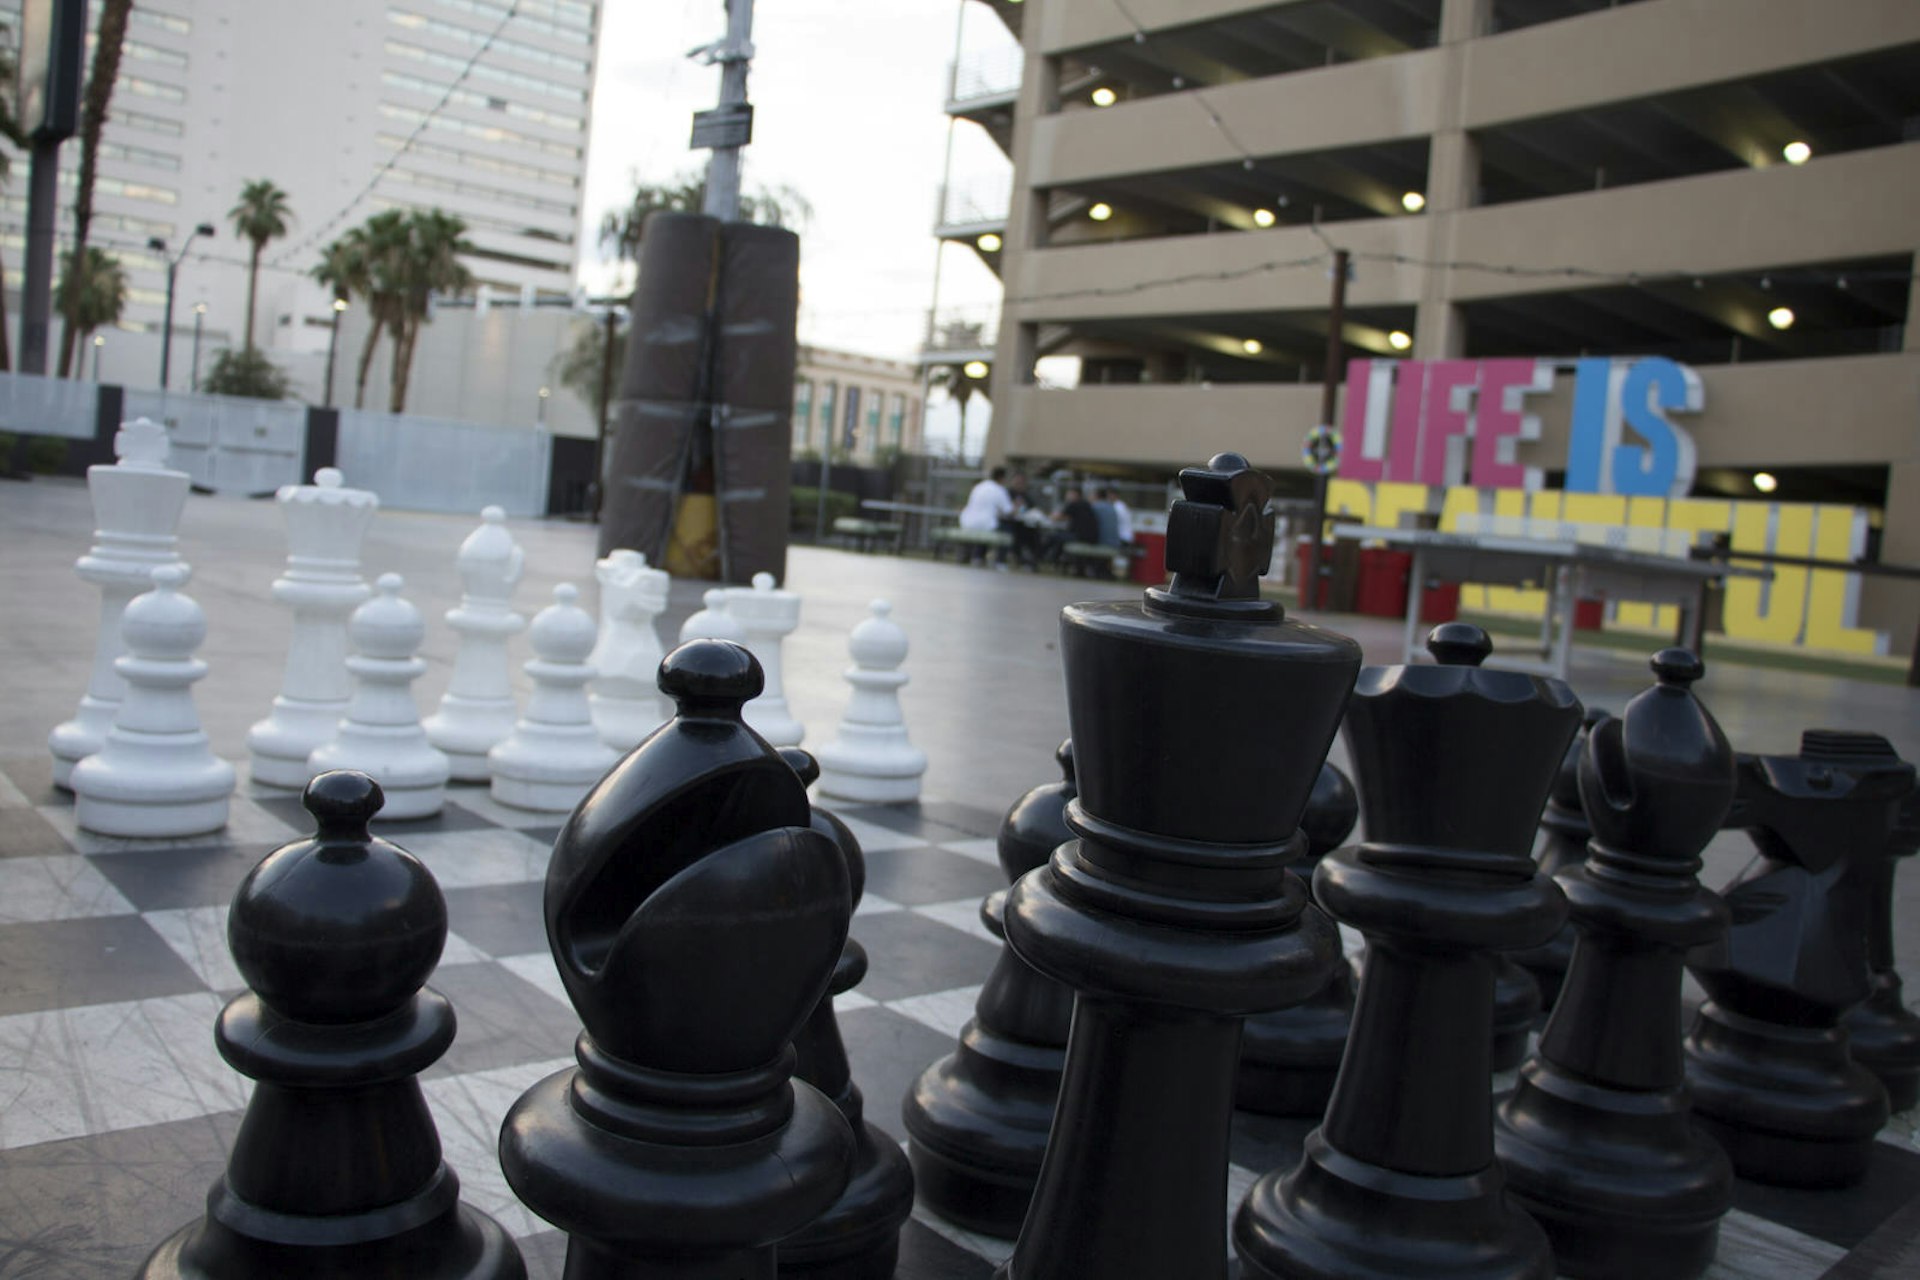 A large chess set, big enough for people to walk around and move the pieces, is seen in the foreground of an outdoor games area in Las Vegas © Greg Thilmont / Lonely Planet